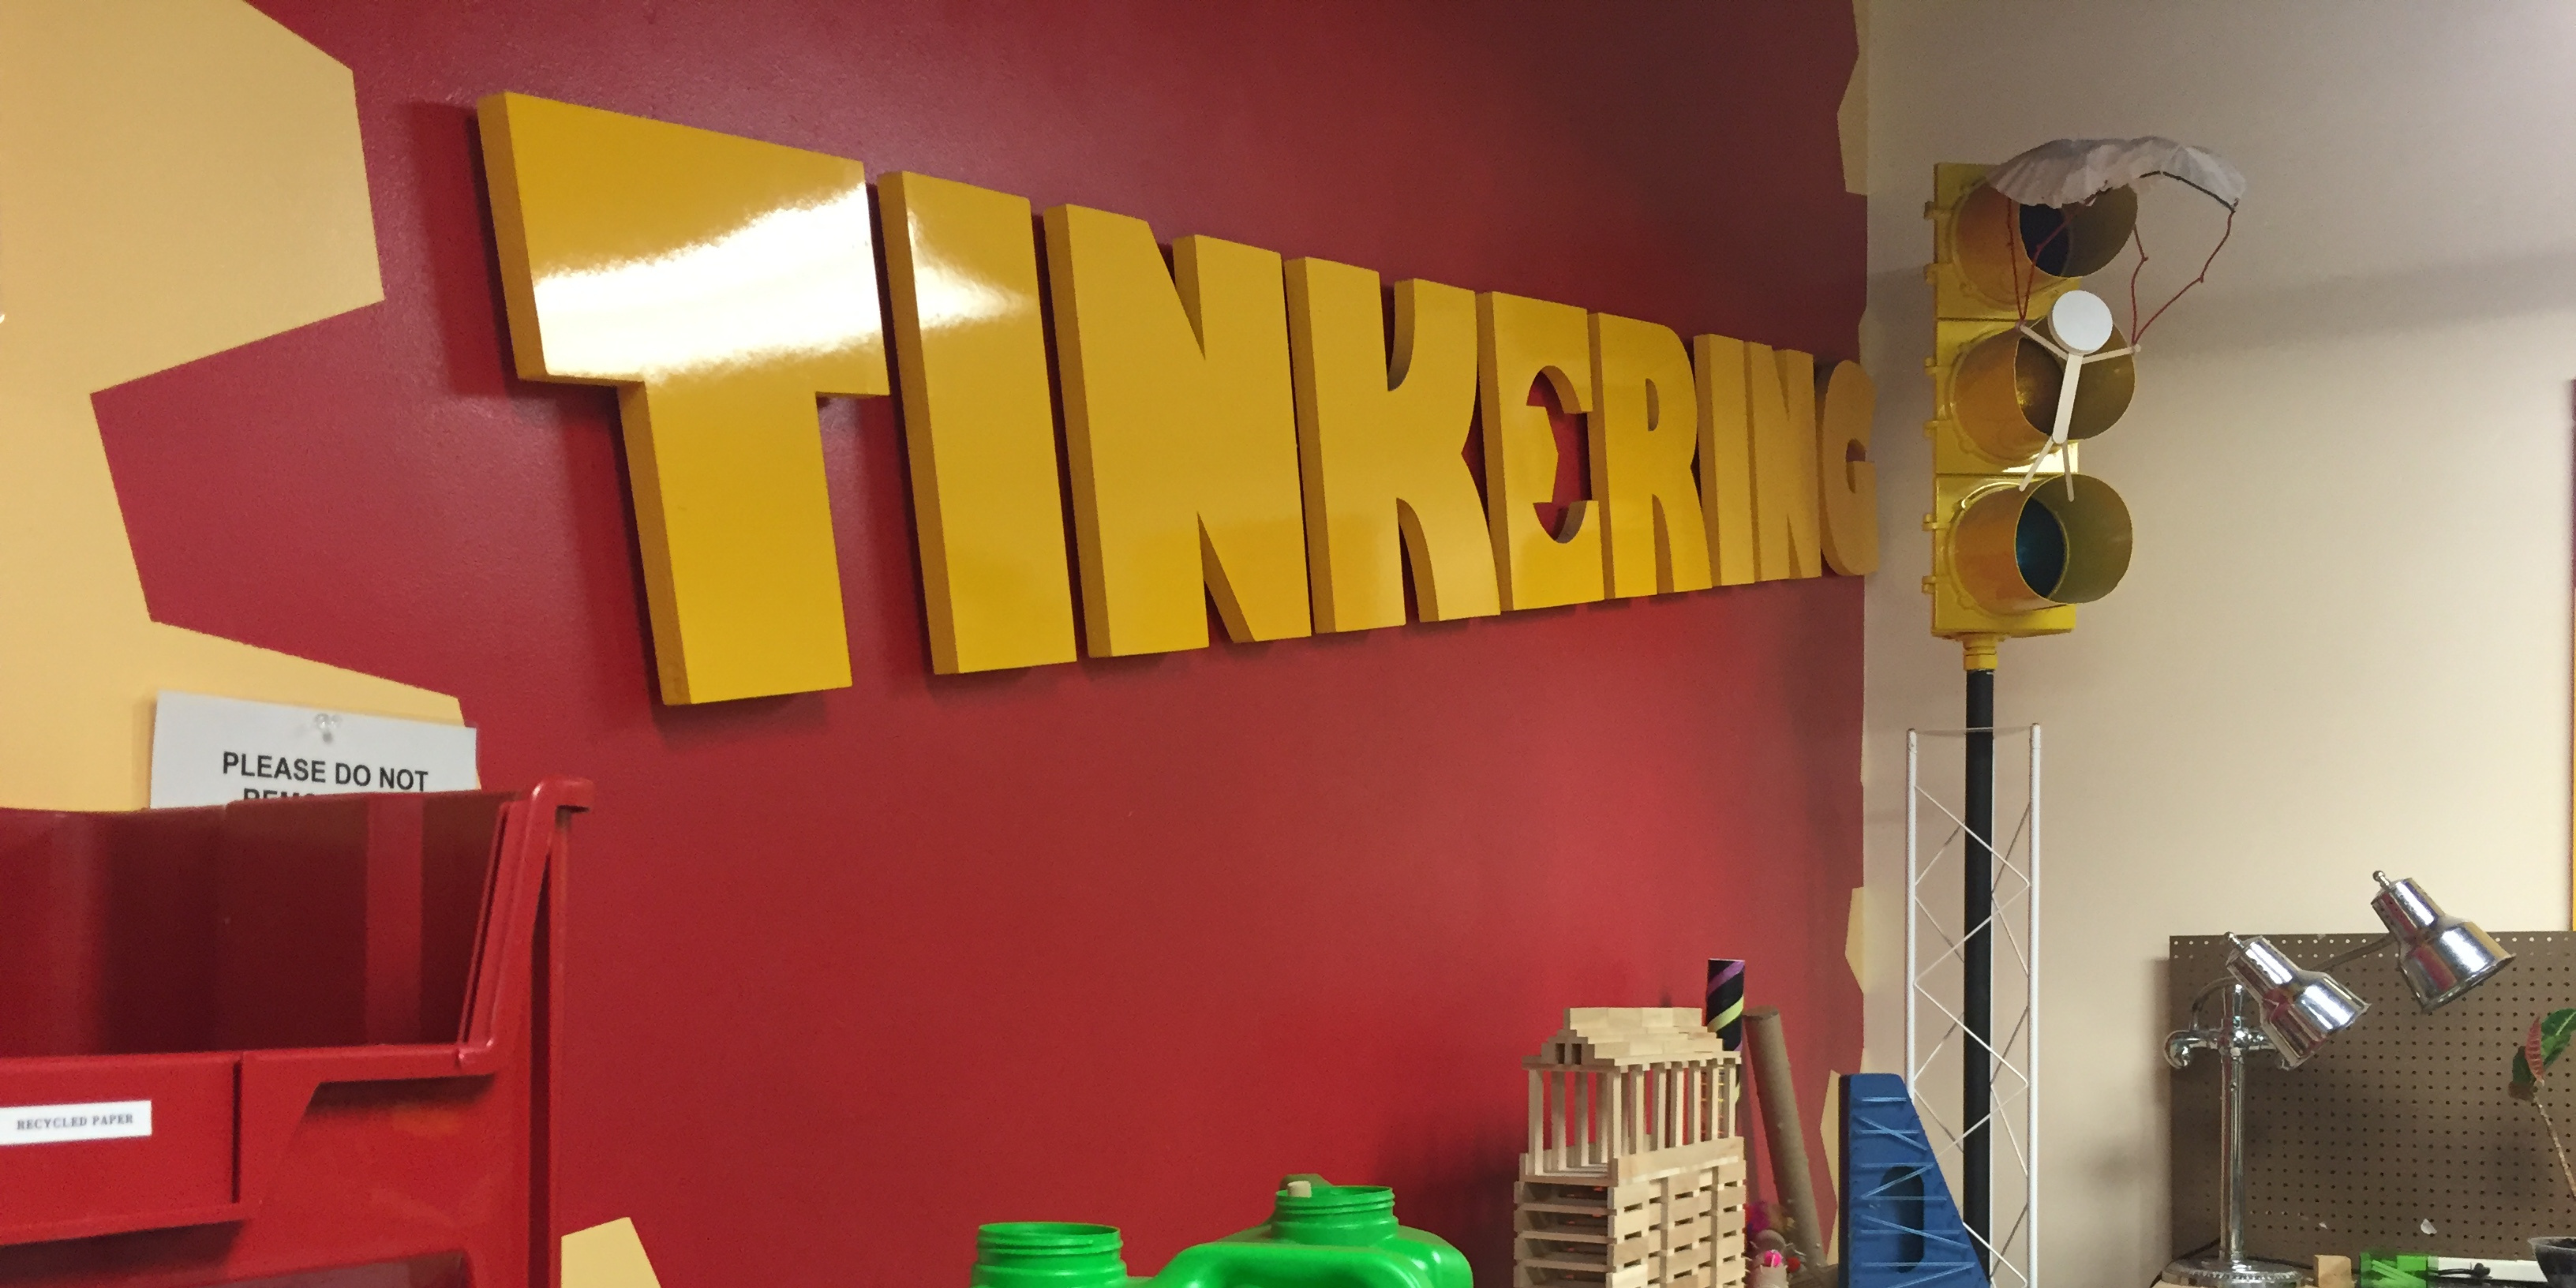 Yellow letters that say "tinkering" on a red background 